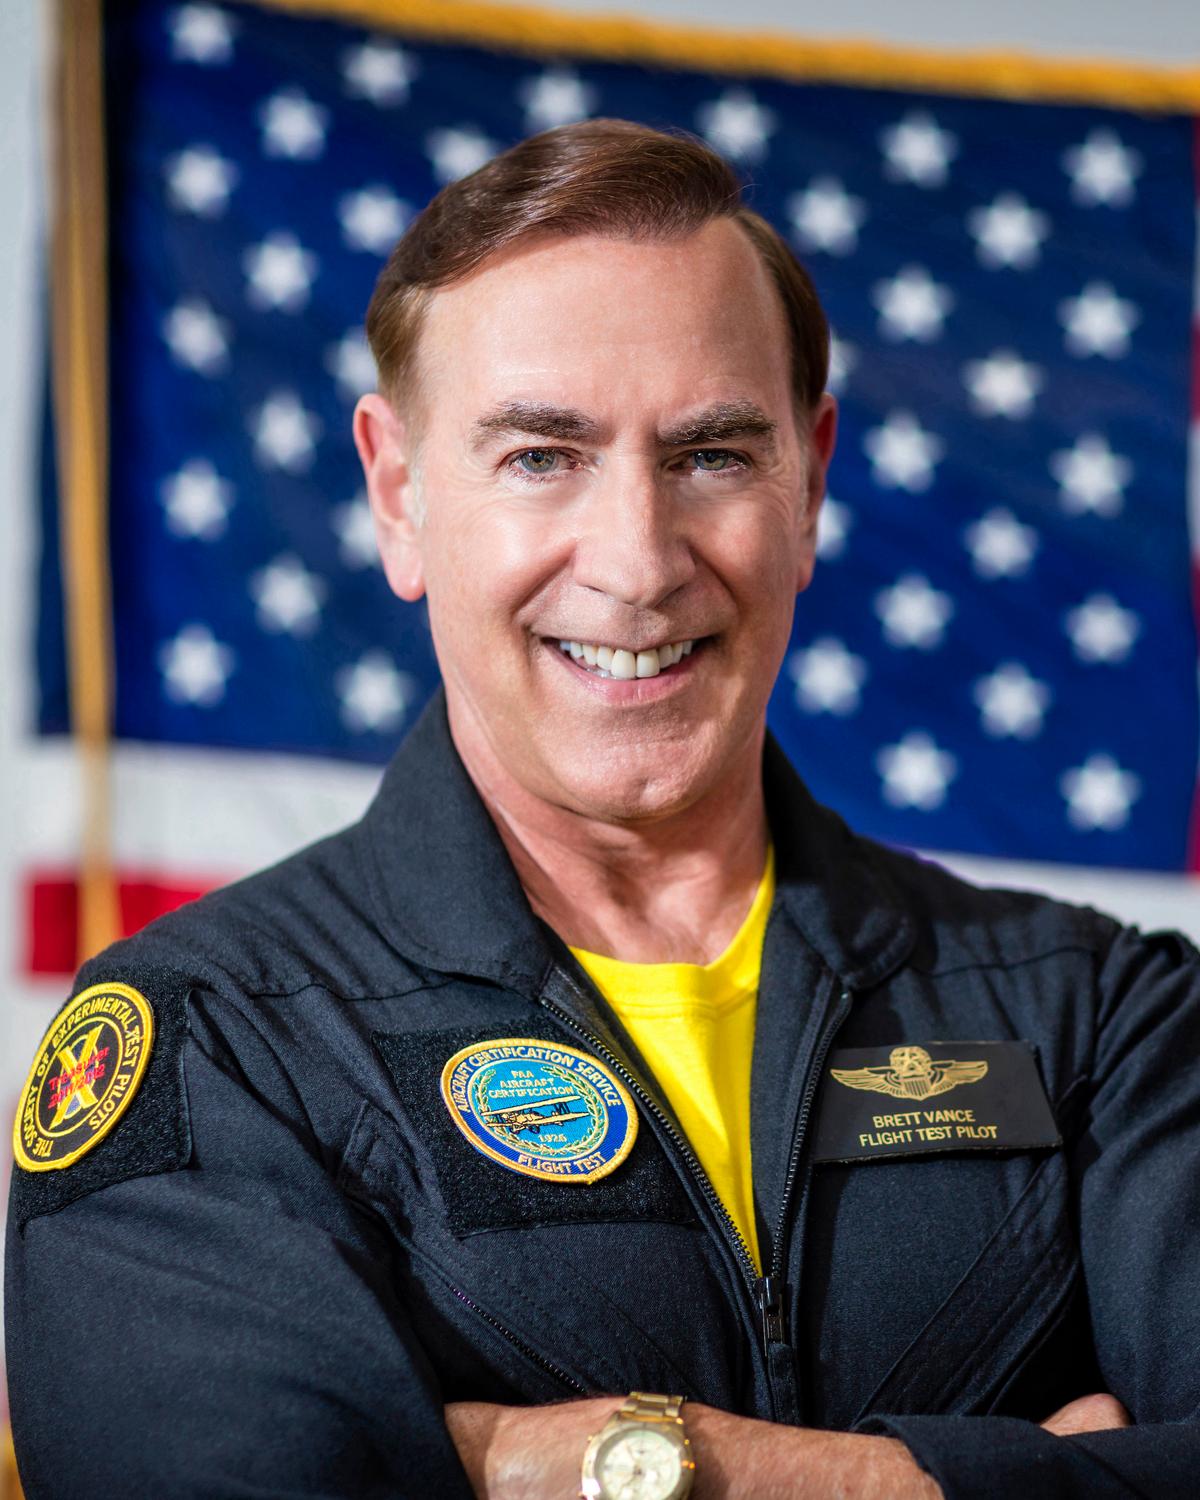 Brett Vance when he worked as a Federal Aviation Administration flight test pilot, in 2019. (Hank Tong)